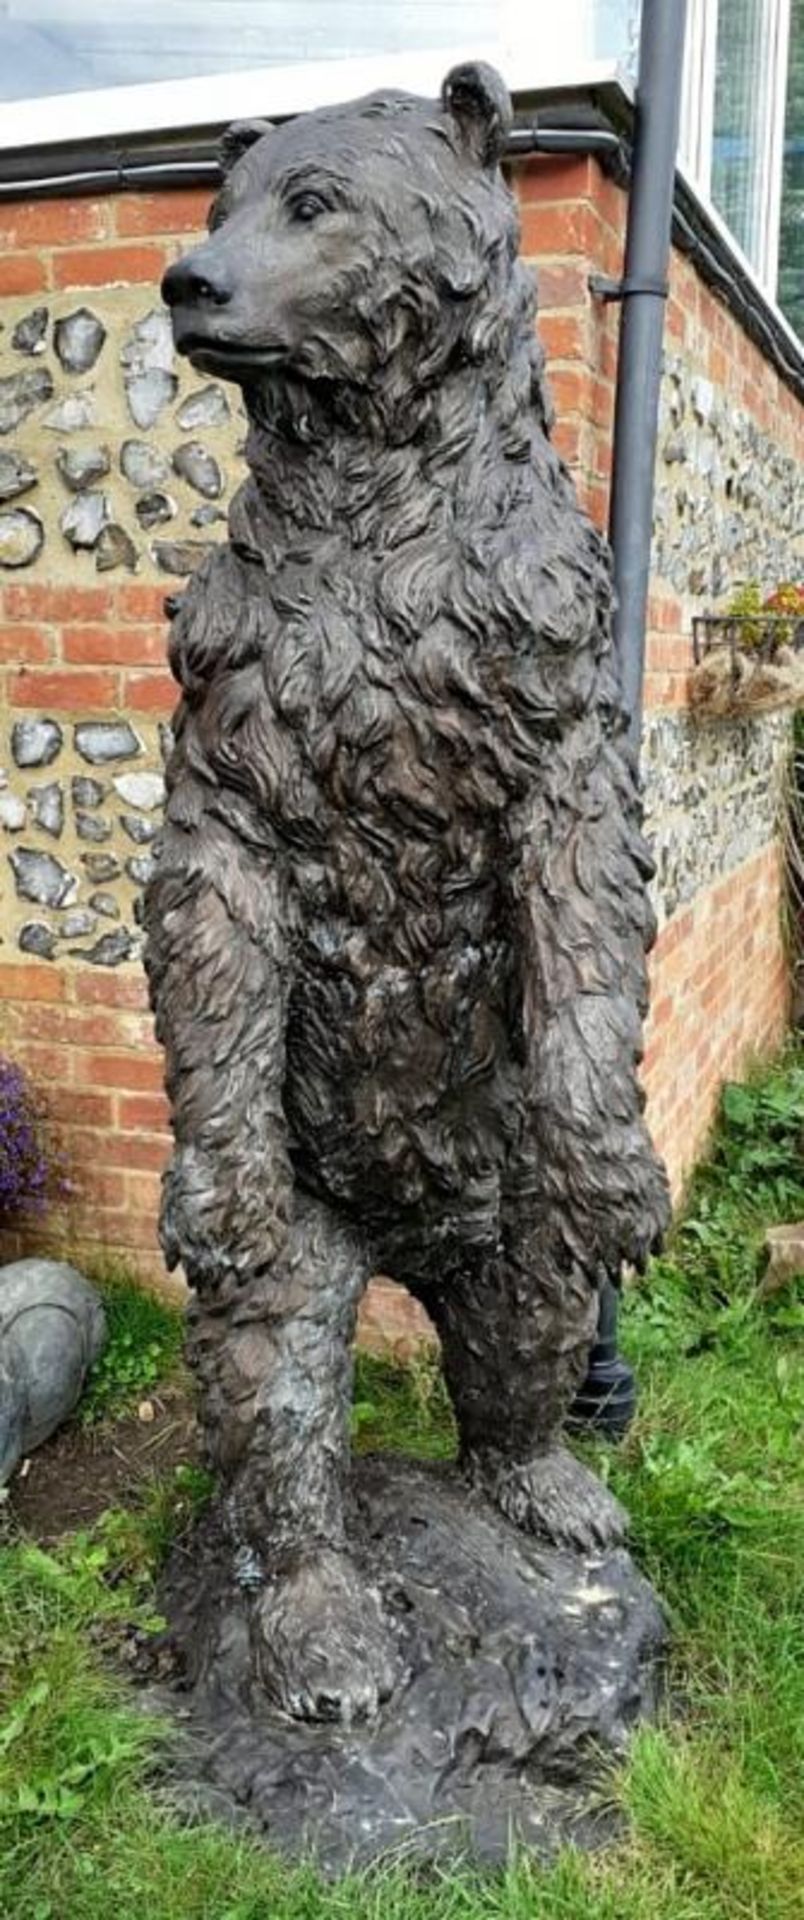 1 x Majestic Real Looking Giant Solid Bronze 1.9 Metre Tall Standing Bear Garden Sculpture - - Image 15 of 15